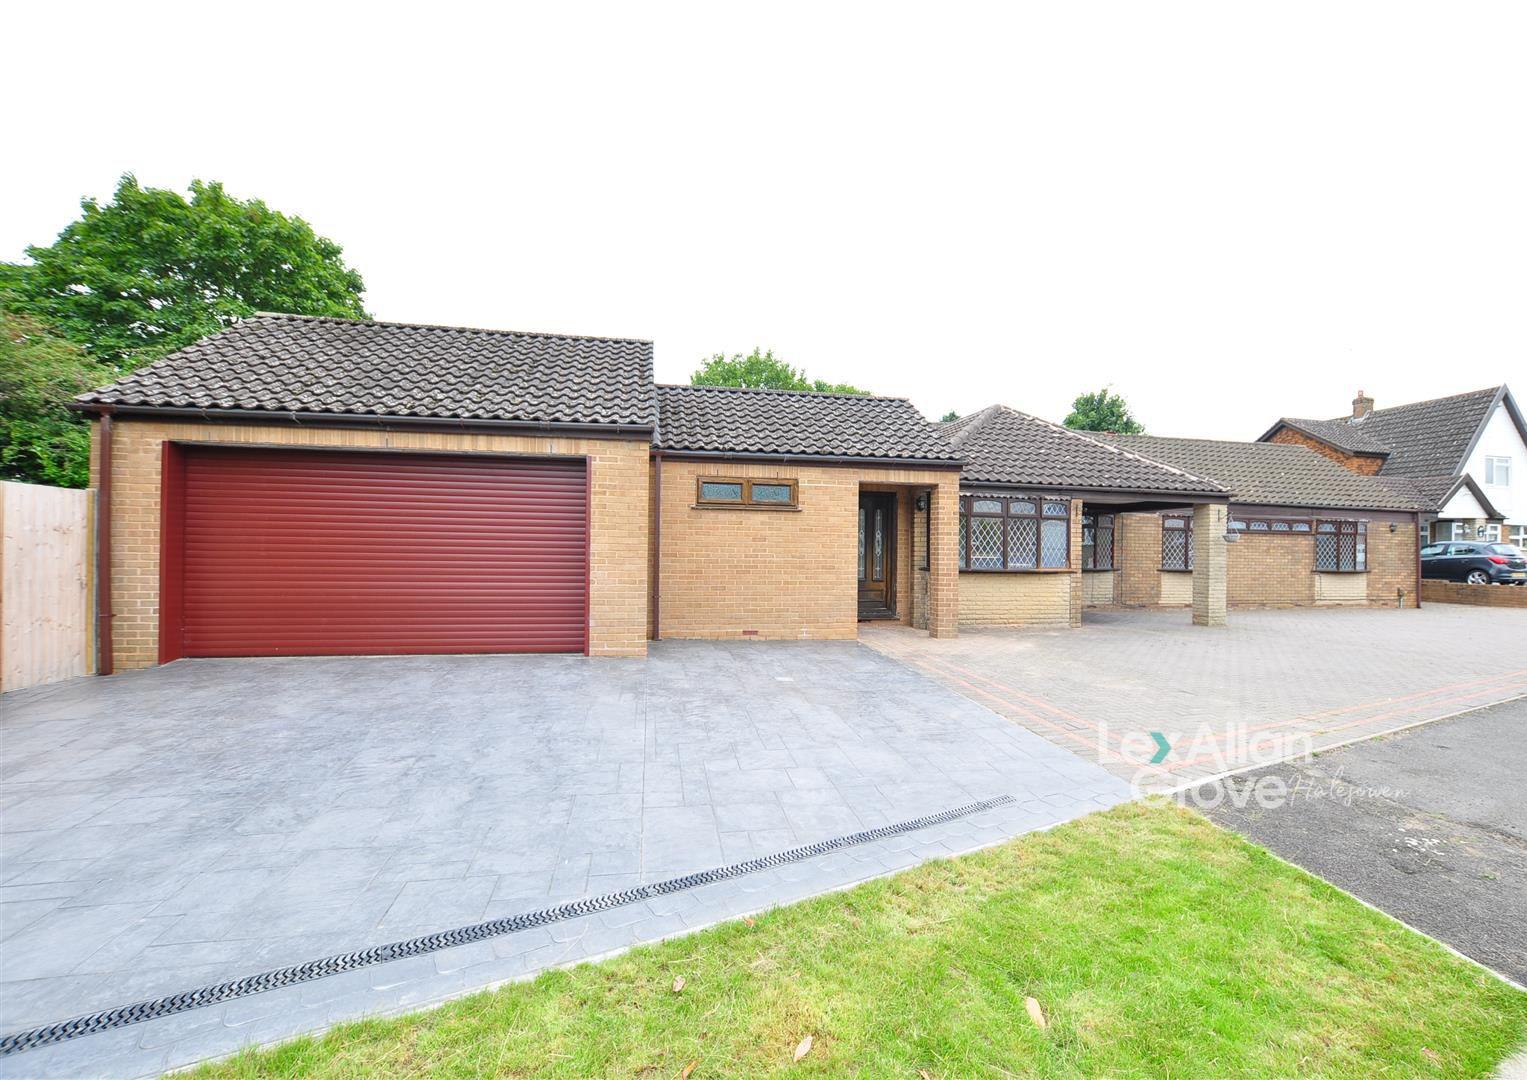 4 bed detached bungalow for sale in Blakedown Road, Halesowen - Property Image 1